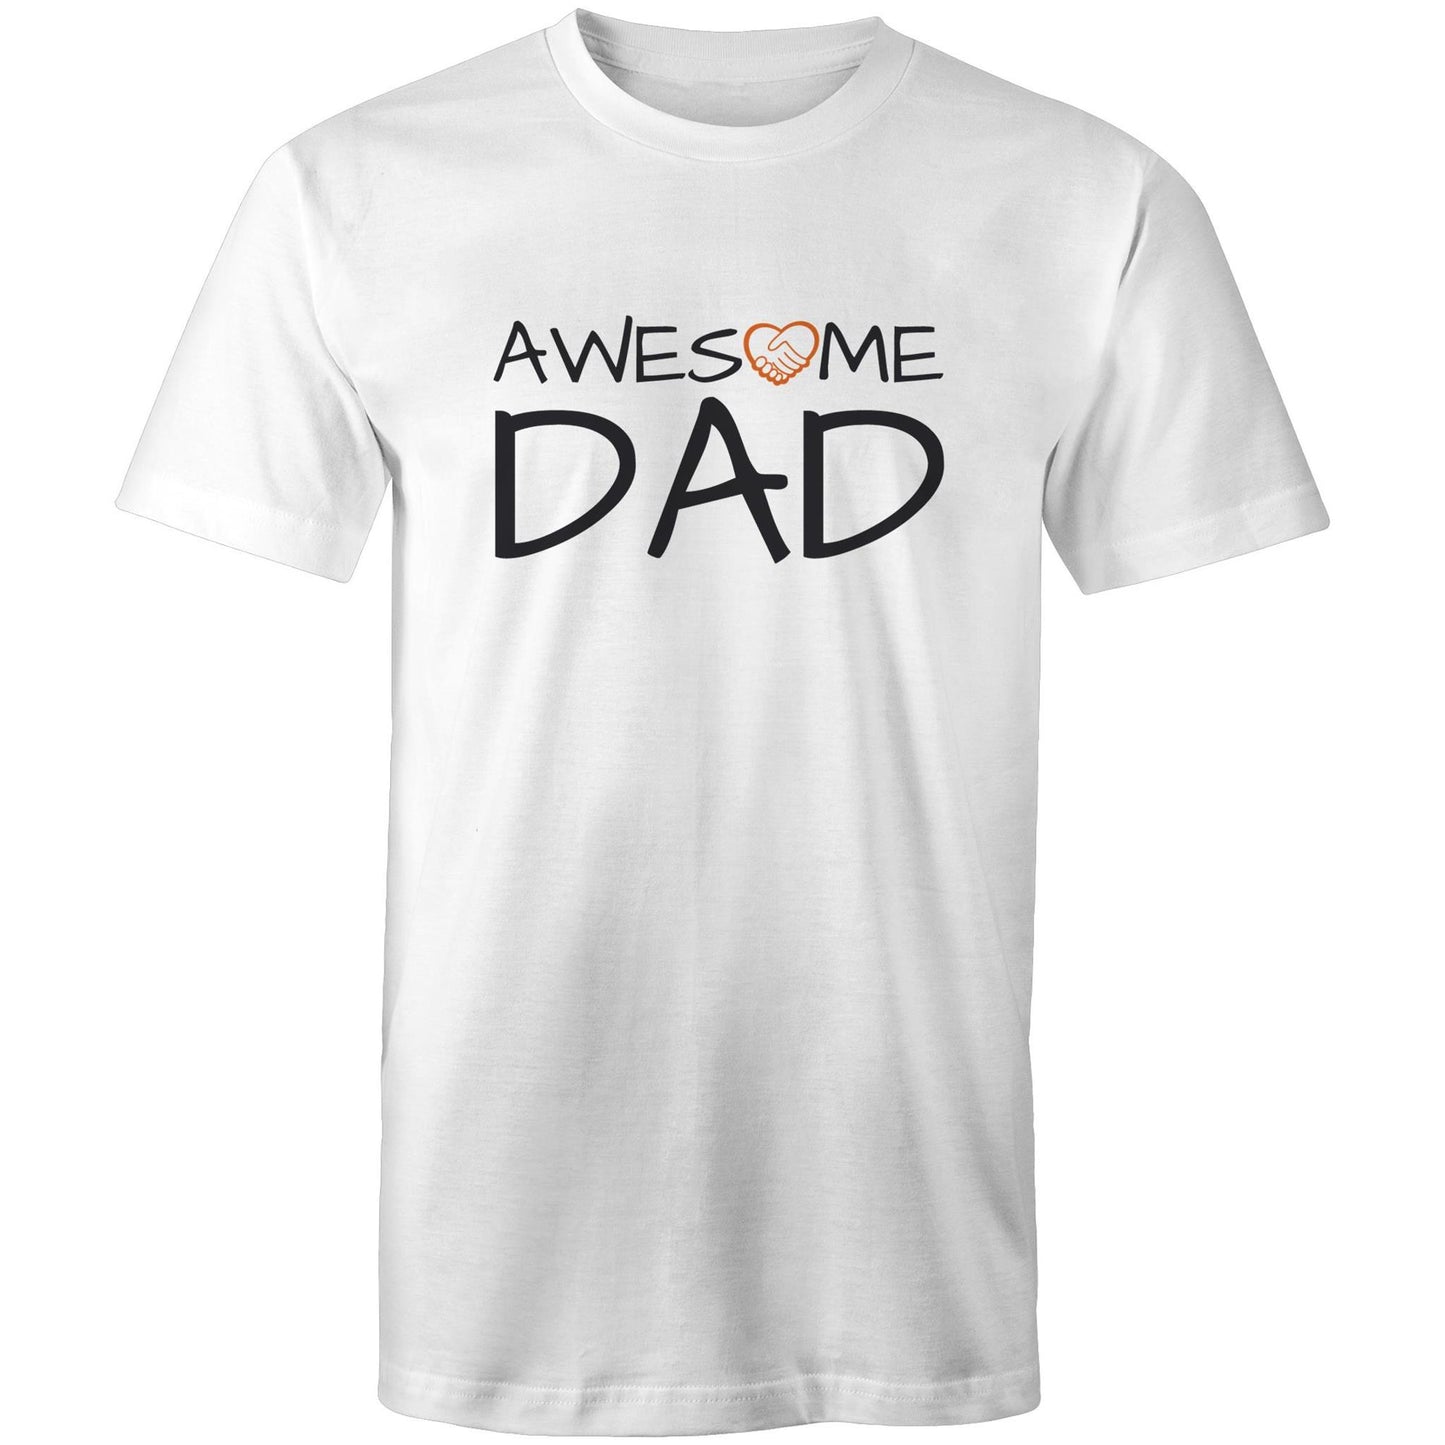 Awesome Dad T-shirt